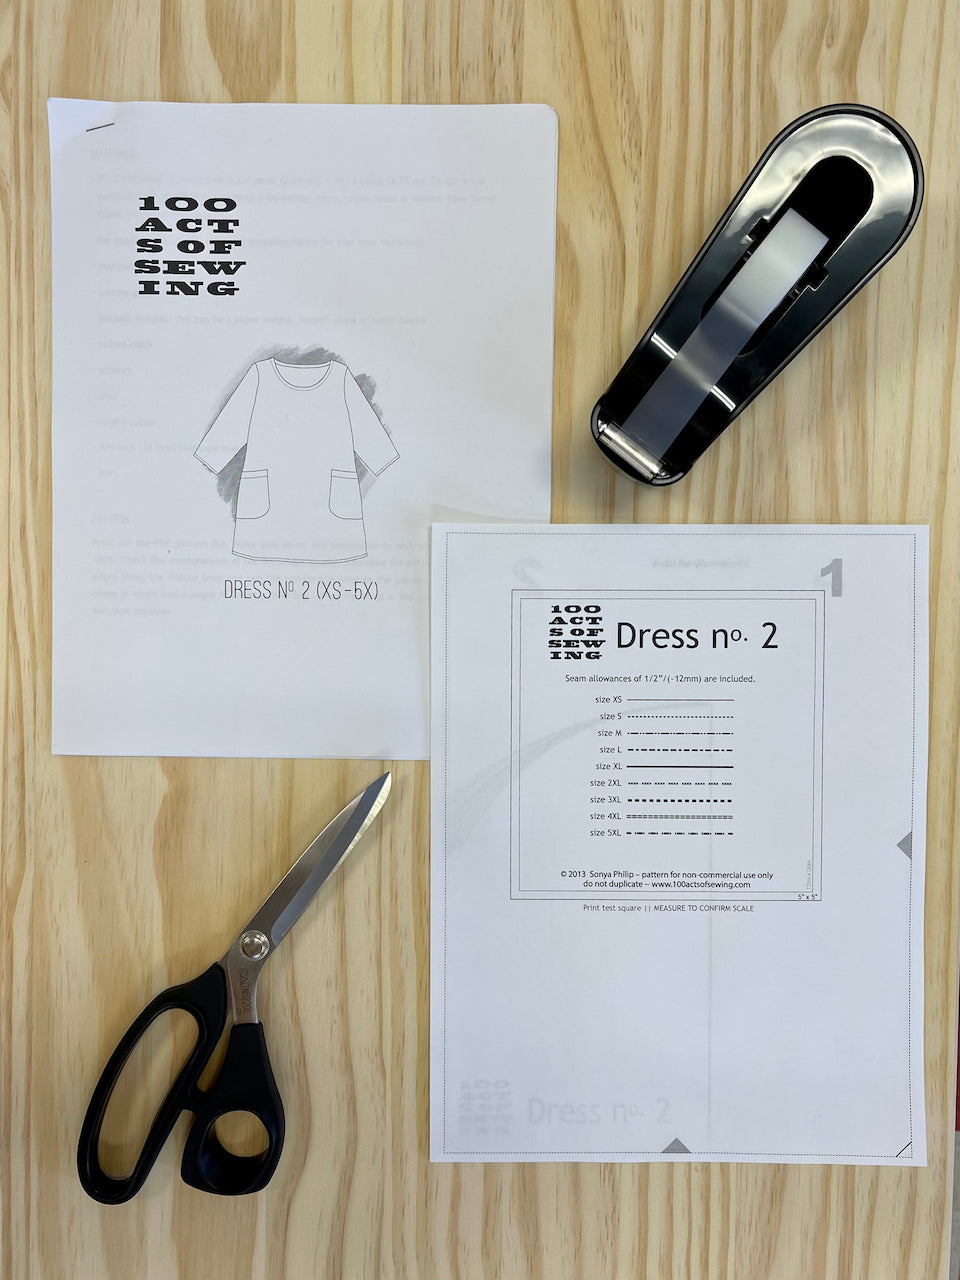 100 Acts of Sewing: Dress No. 2 - PDF Sewing Pattern